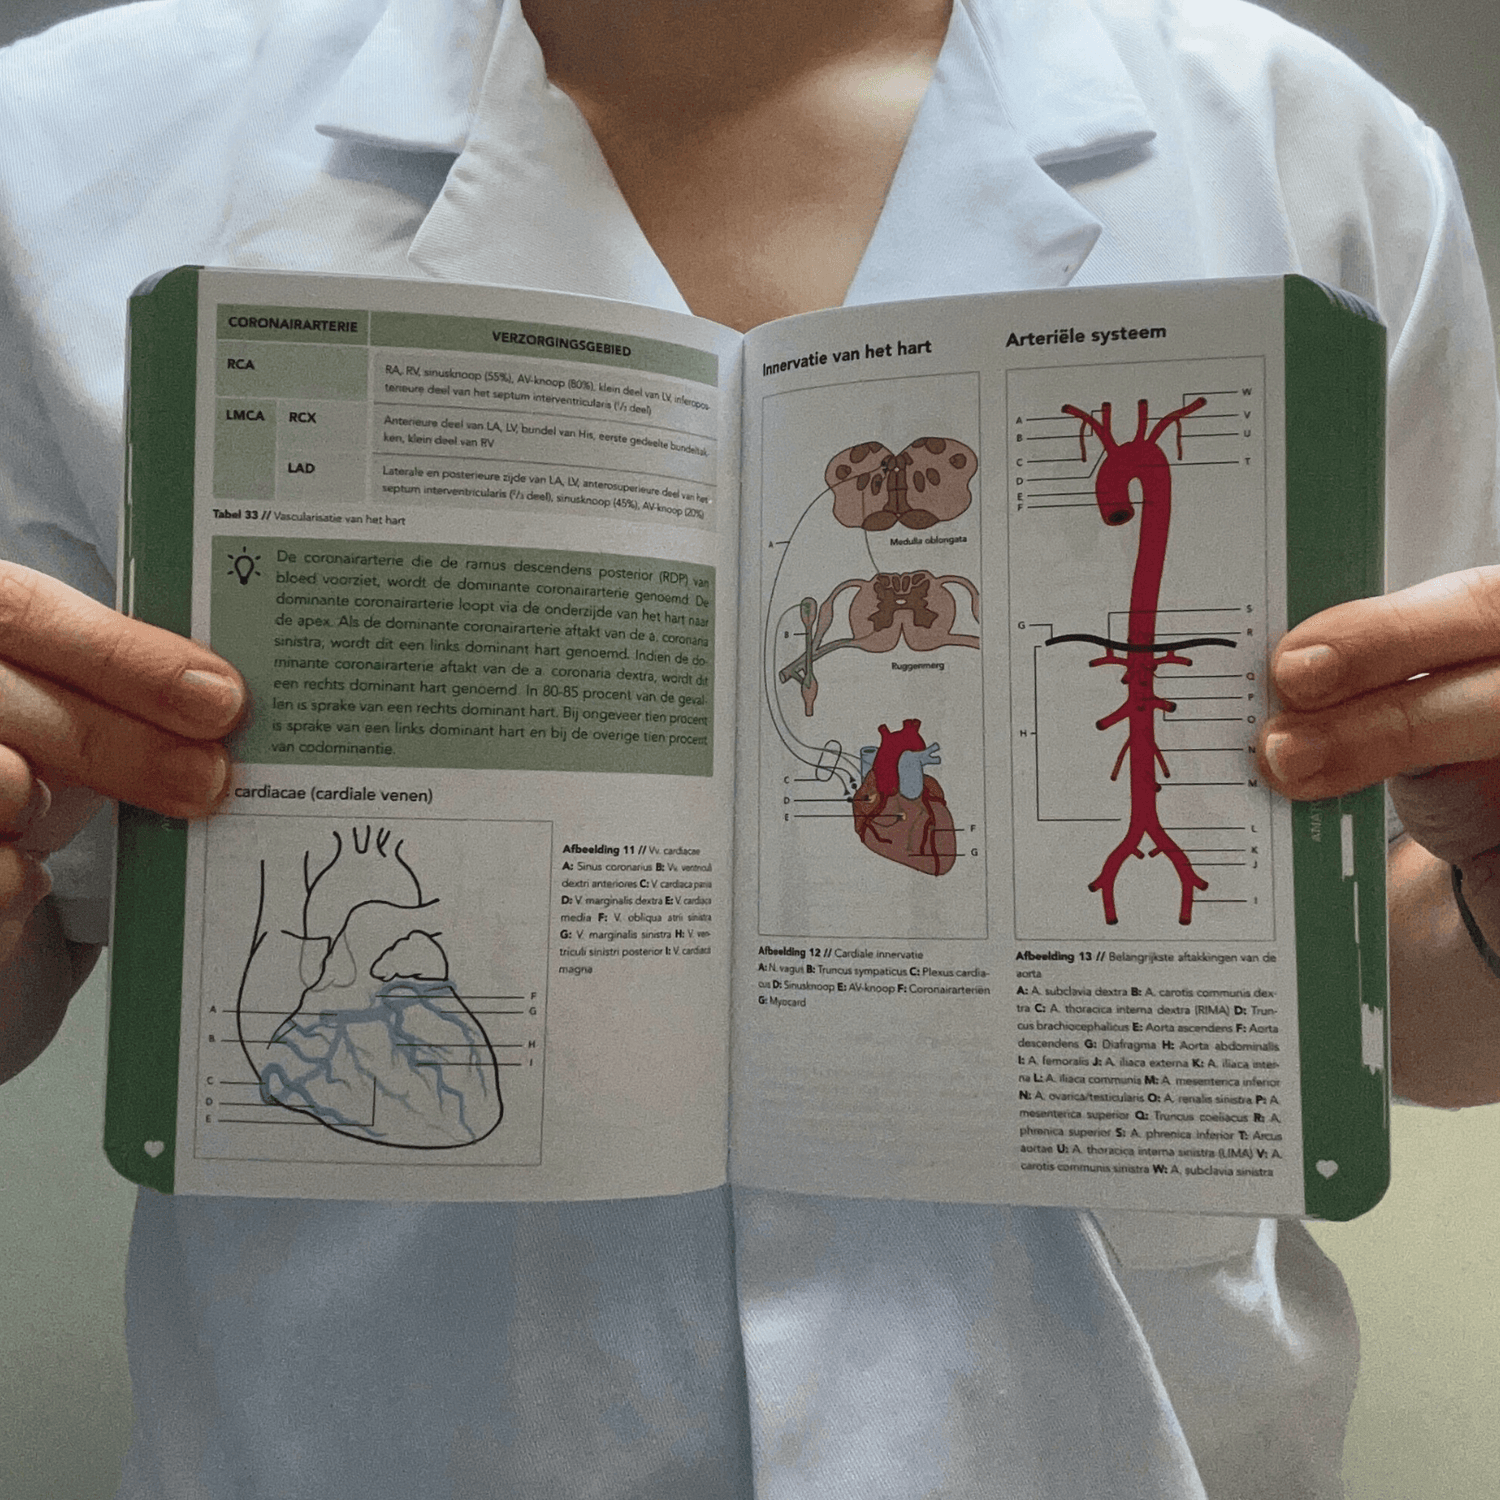 Medical professional holding the Cardiology pocket